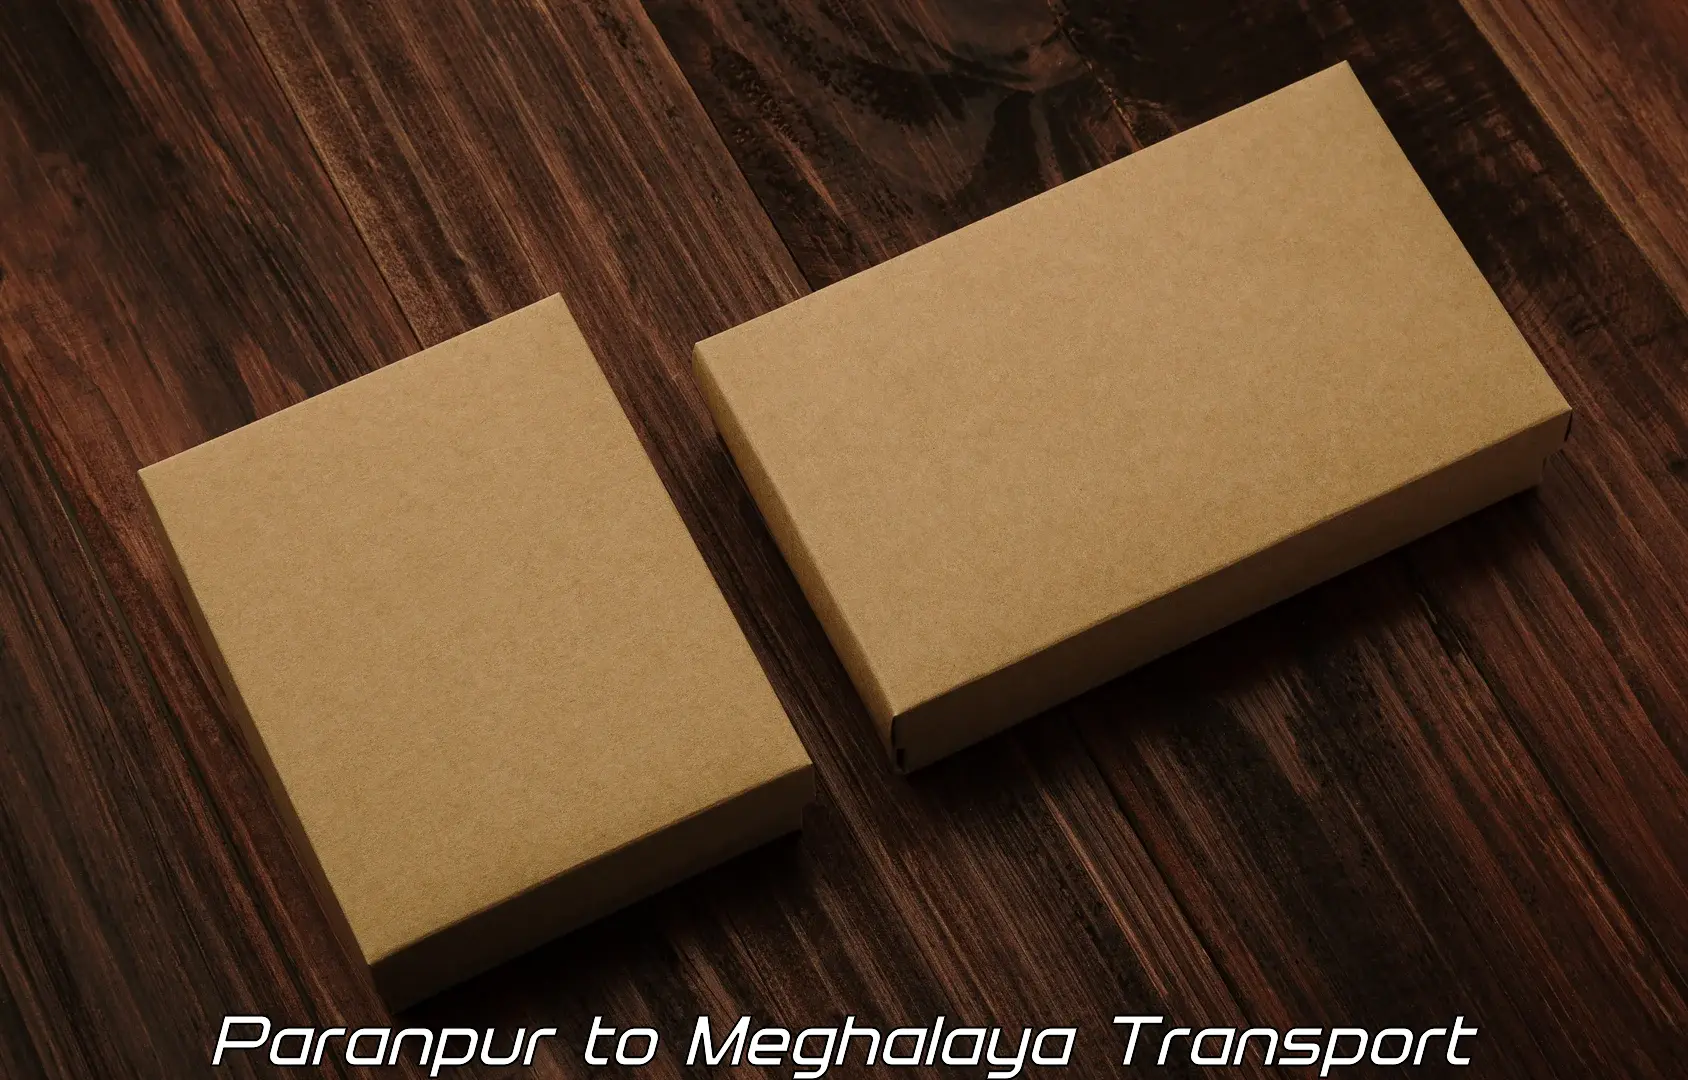 Truck transport companies in India Paranpur to Meghalaya